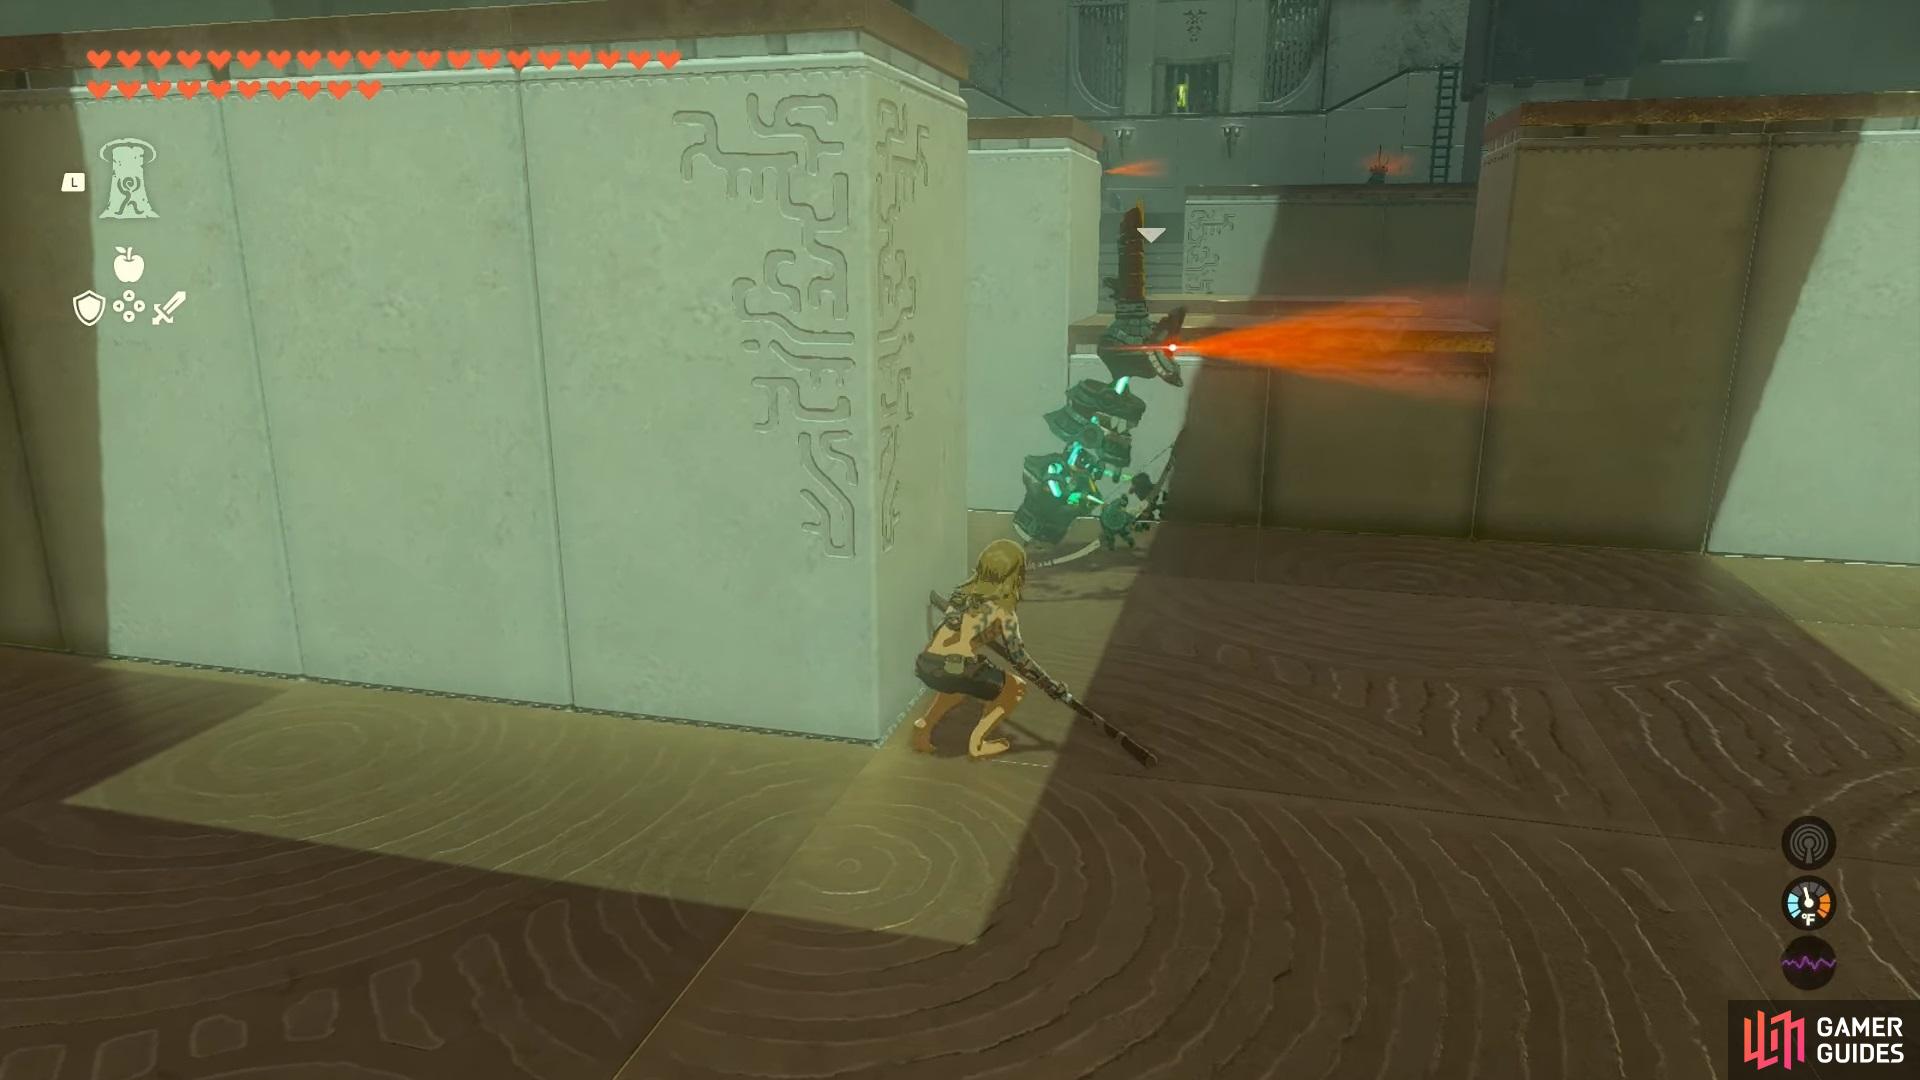 A patroling Construct in the shrine